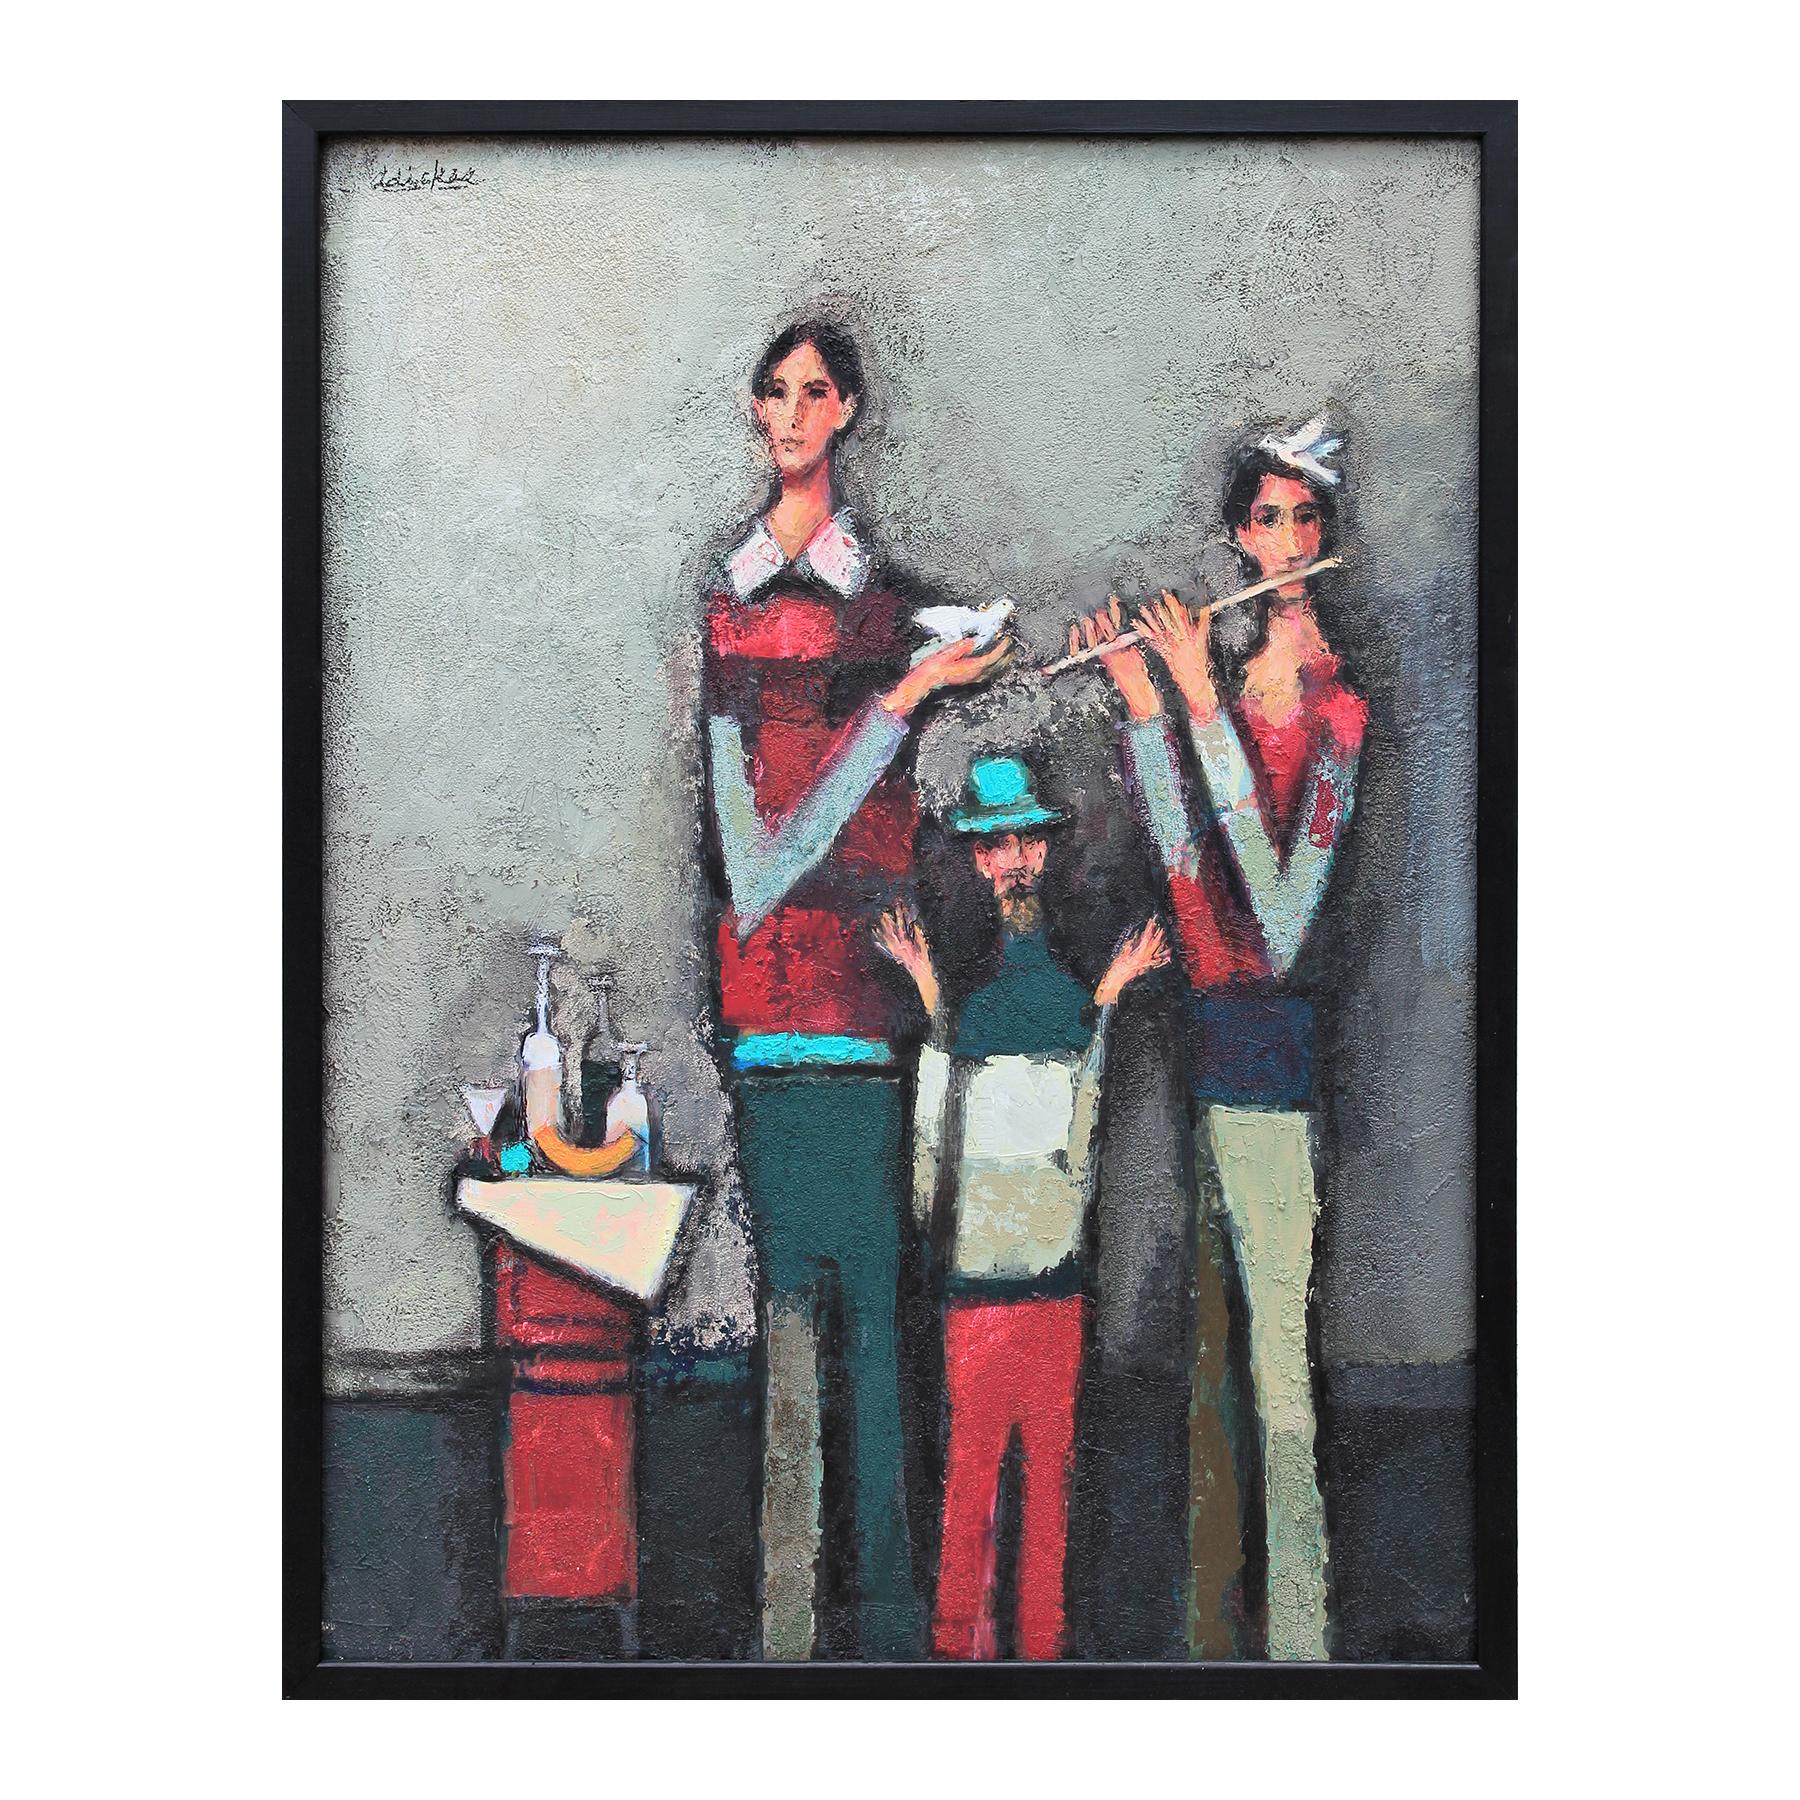 David Adickes Figurative Painting - "Flutist with Two Friends" Abstract Modern Figurative Musician Portrait Painting